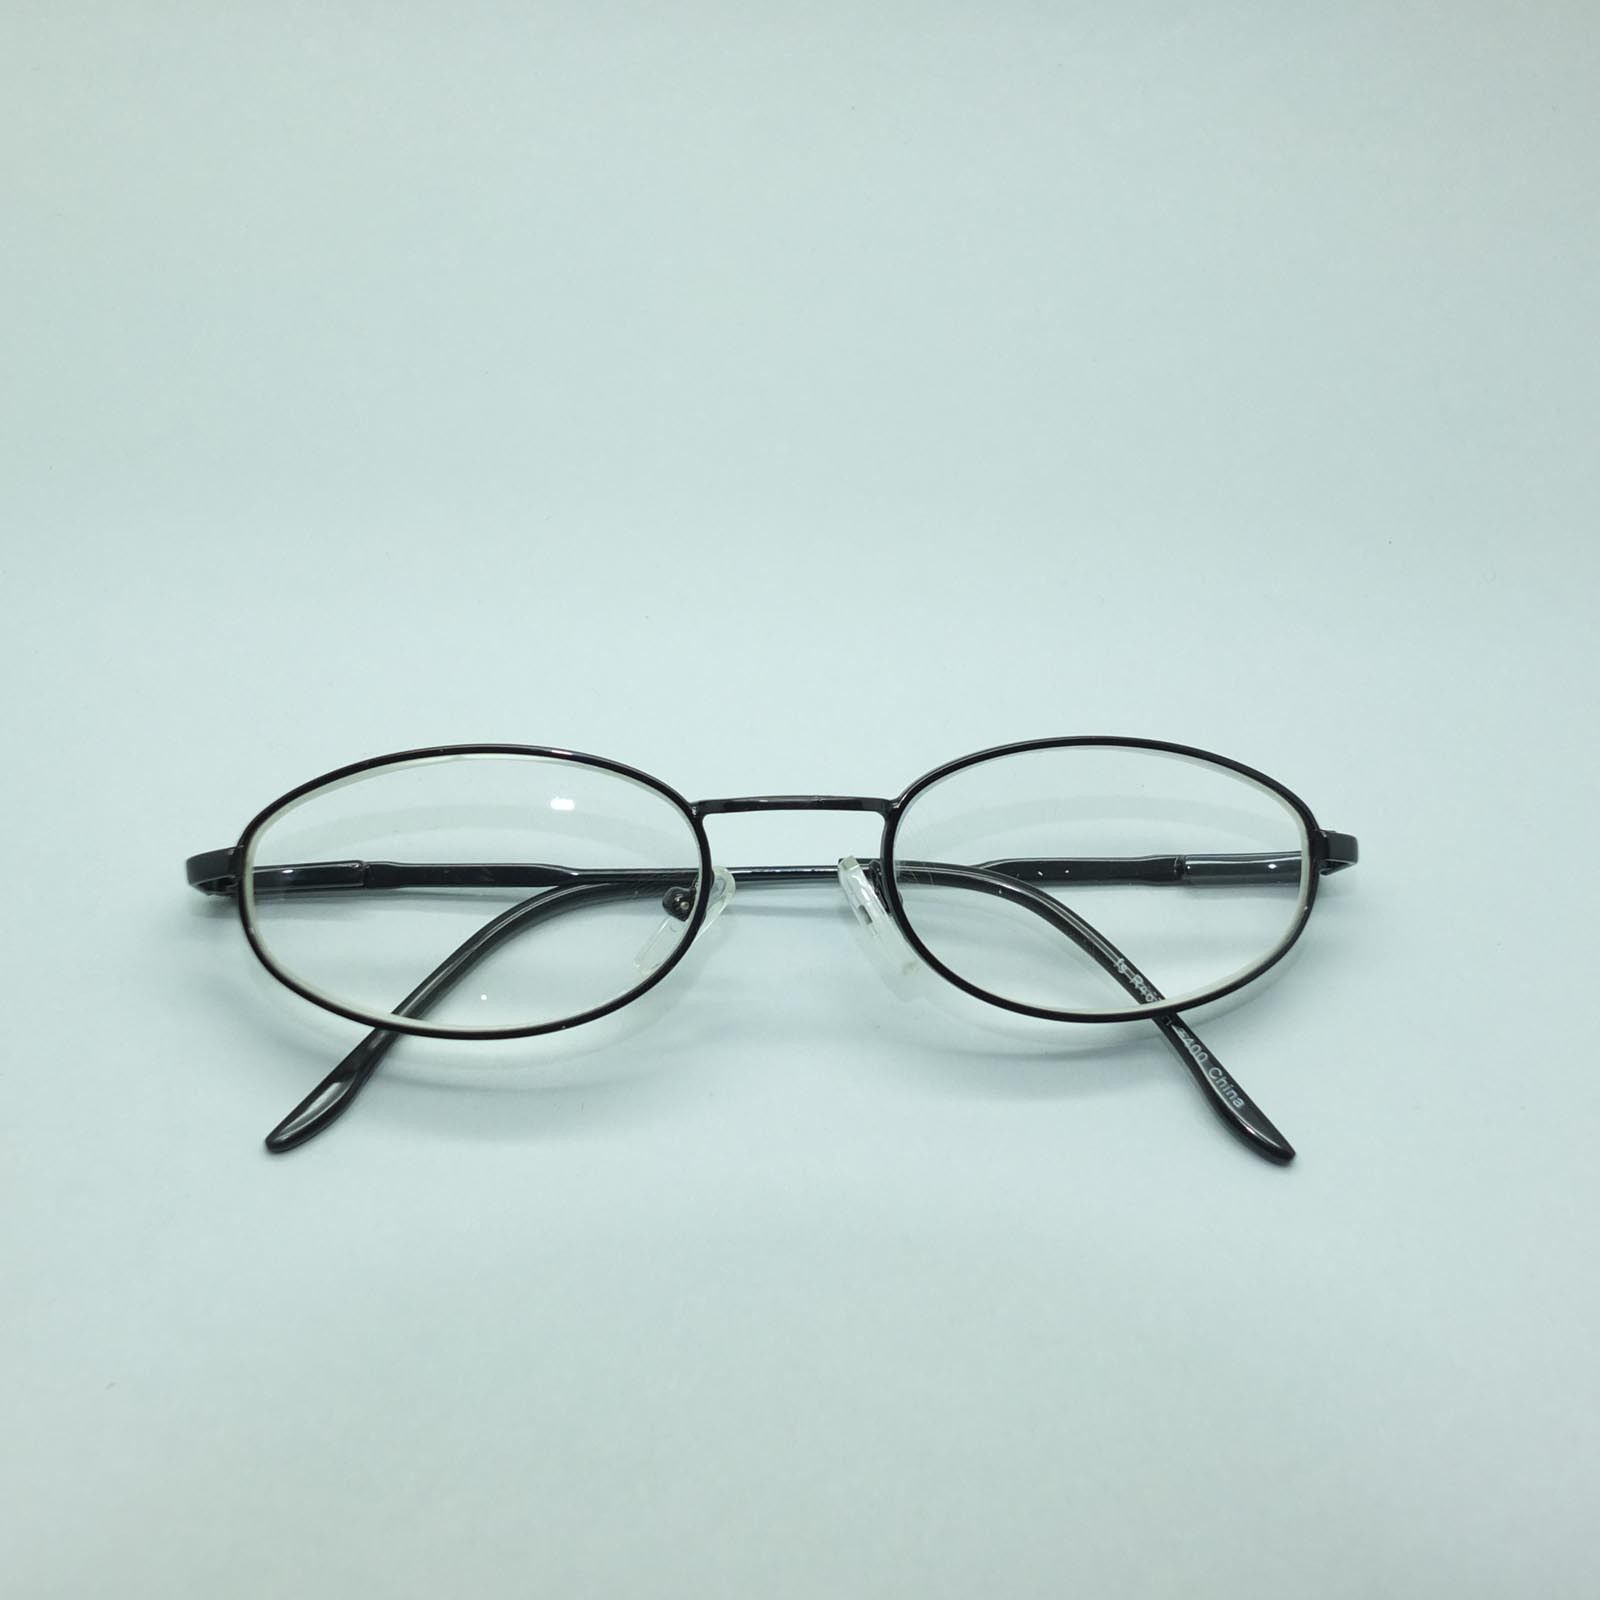 Reading Glasses Oval Polished Black Metal Wire Frame Strong 4 00 Strength Reading Glasses